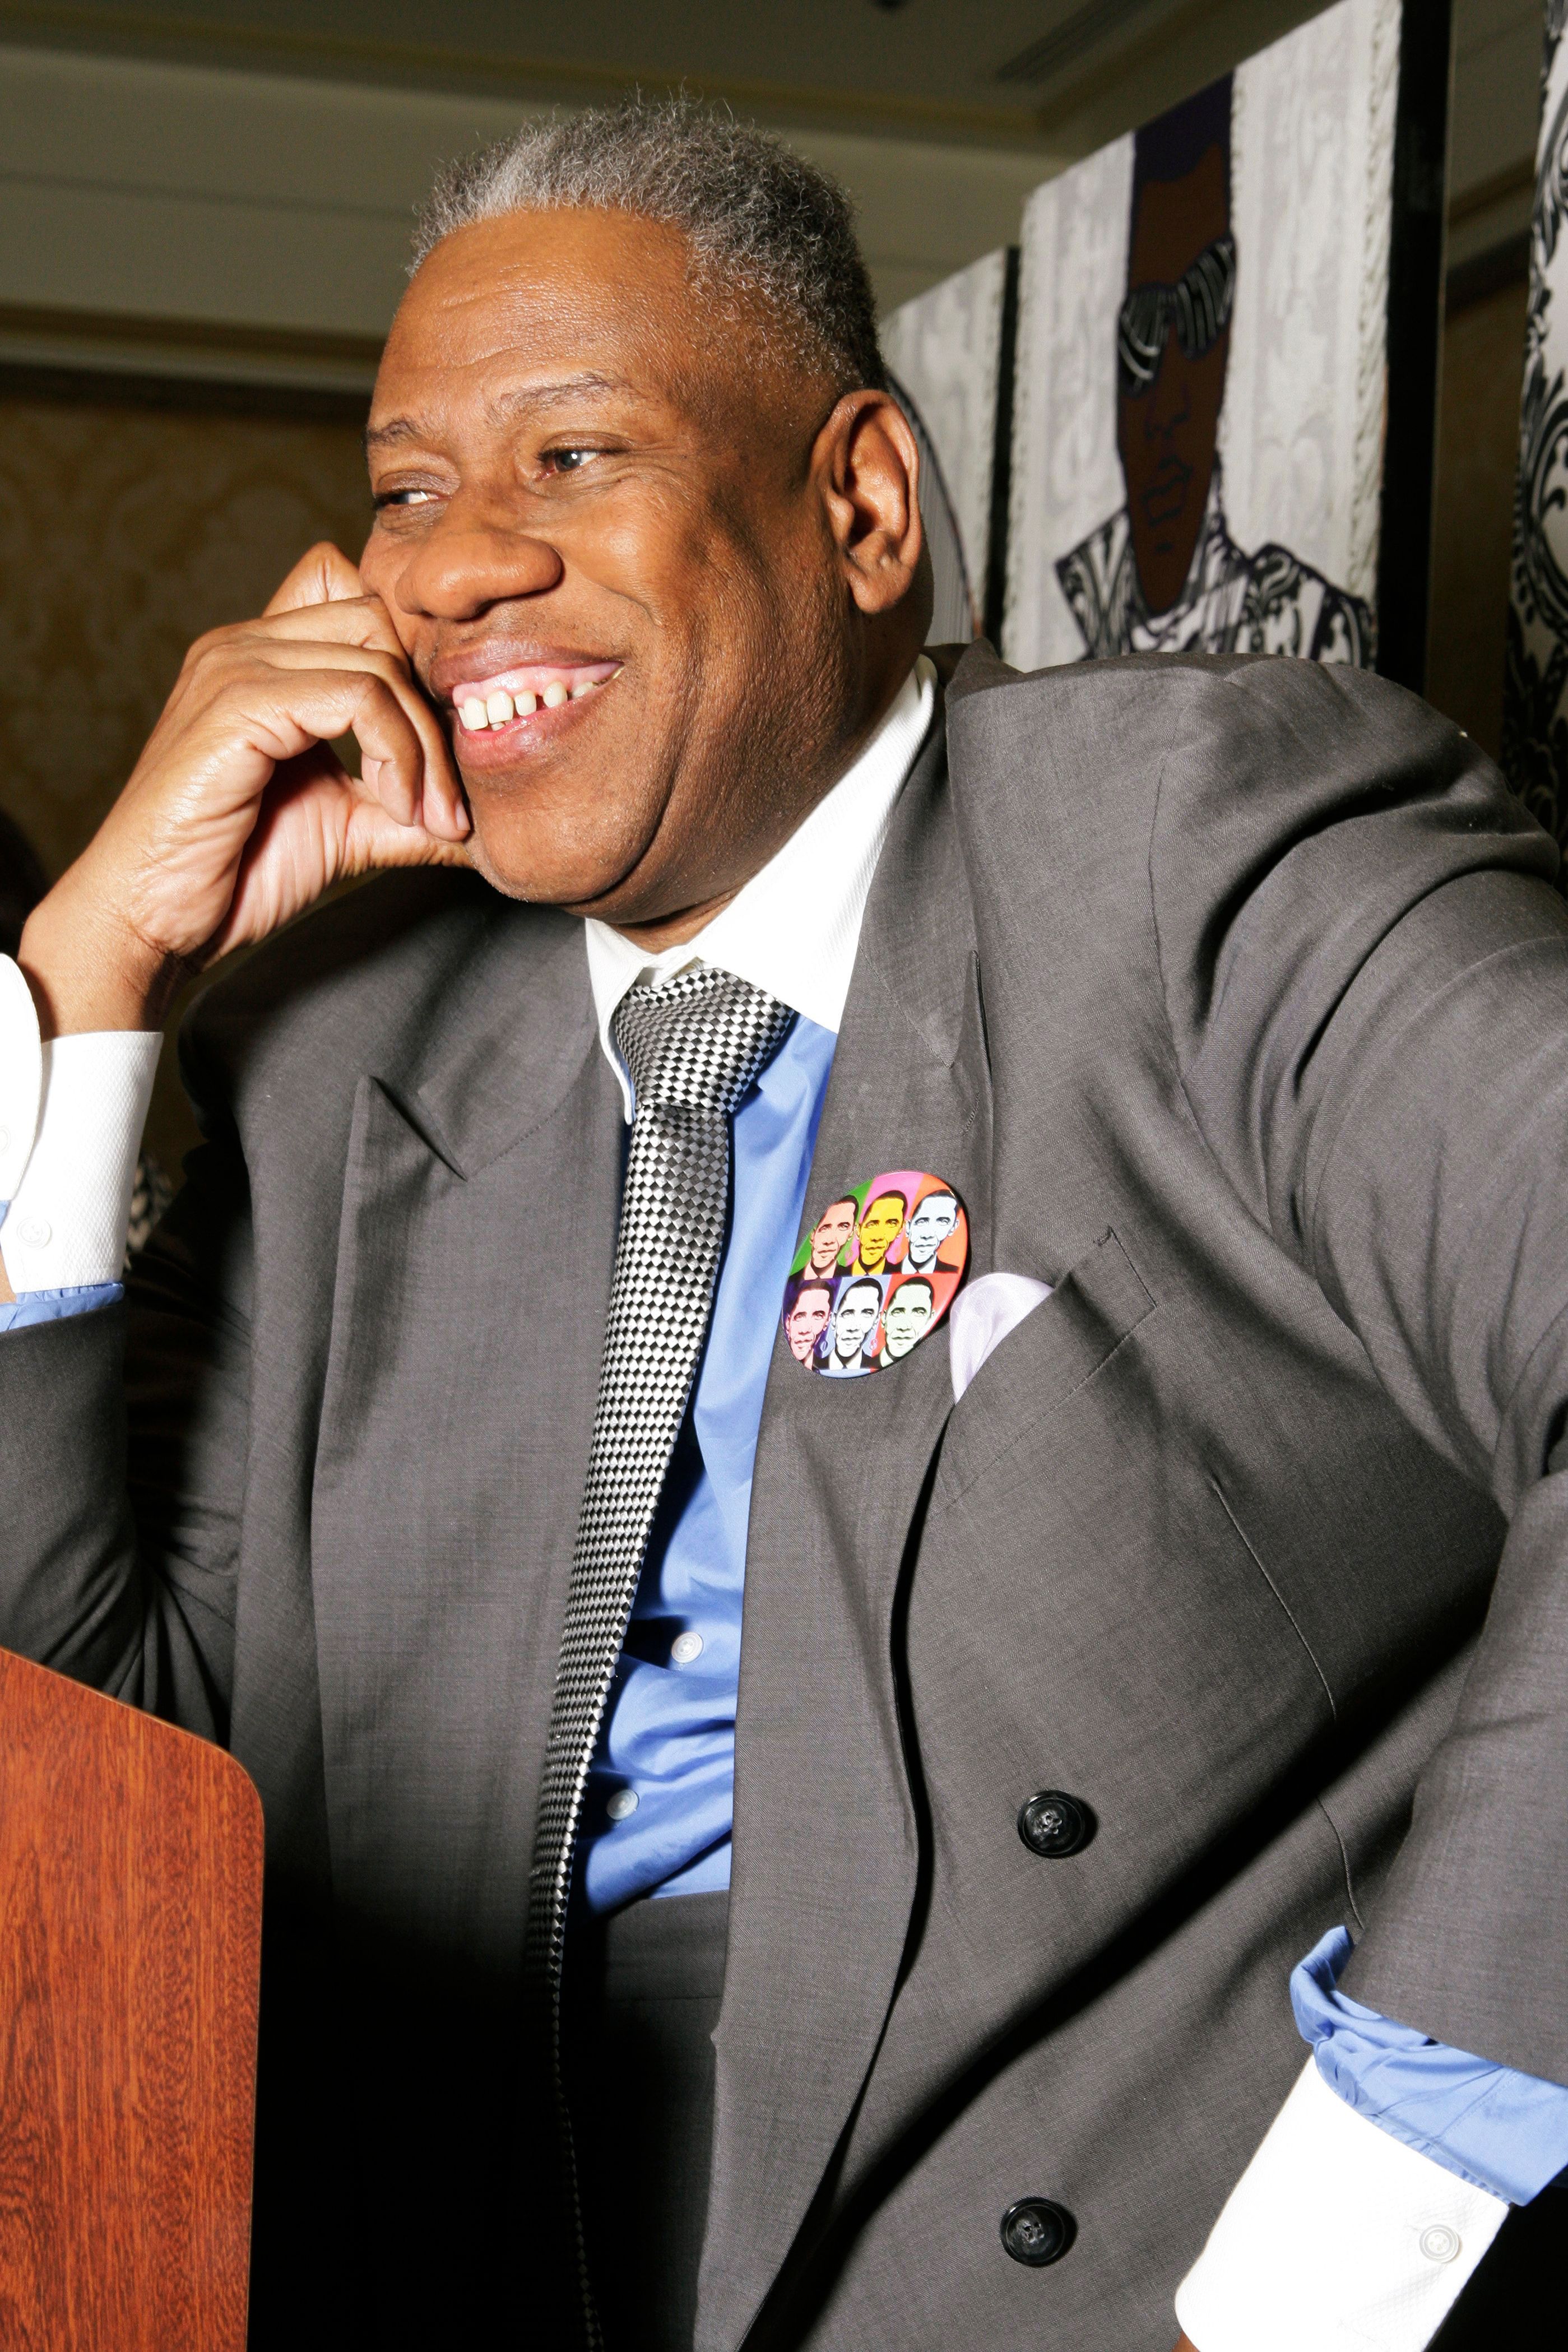 Fashion icon Andre Leon Talley dead at 73 - ABC News